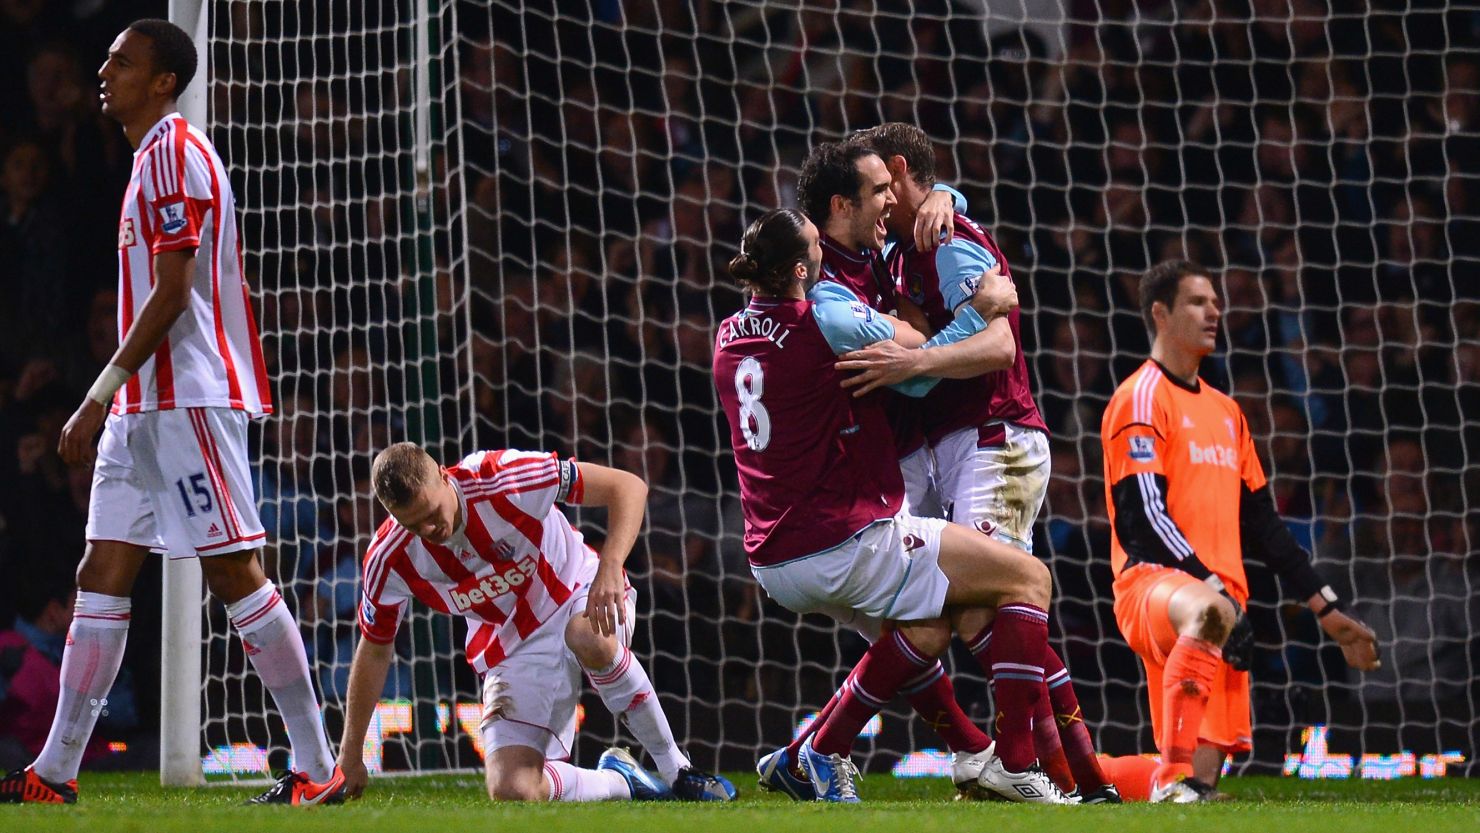 Joey O'Brien is sandwiched by Andy Carroll (8) and Kevin Nolan after scoring West Ham's equalizer against Stoke